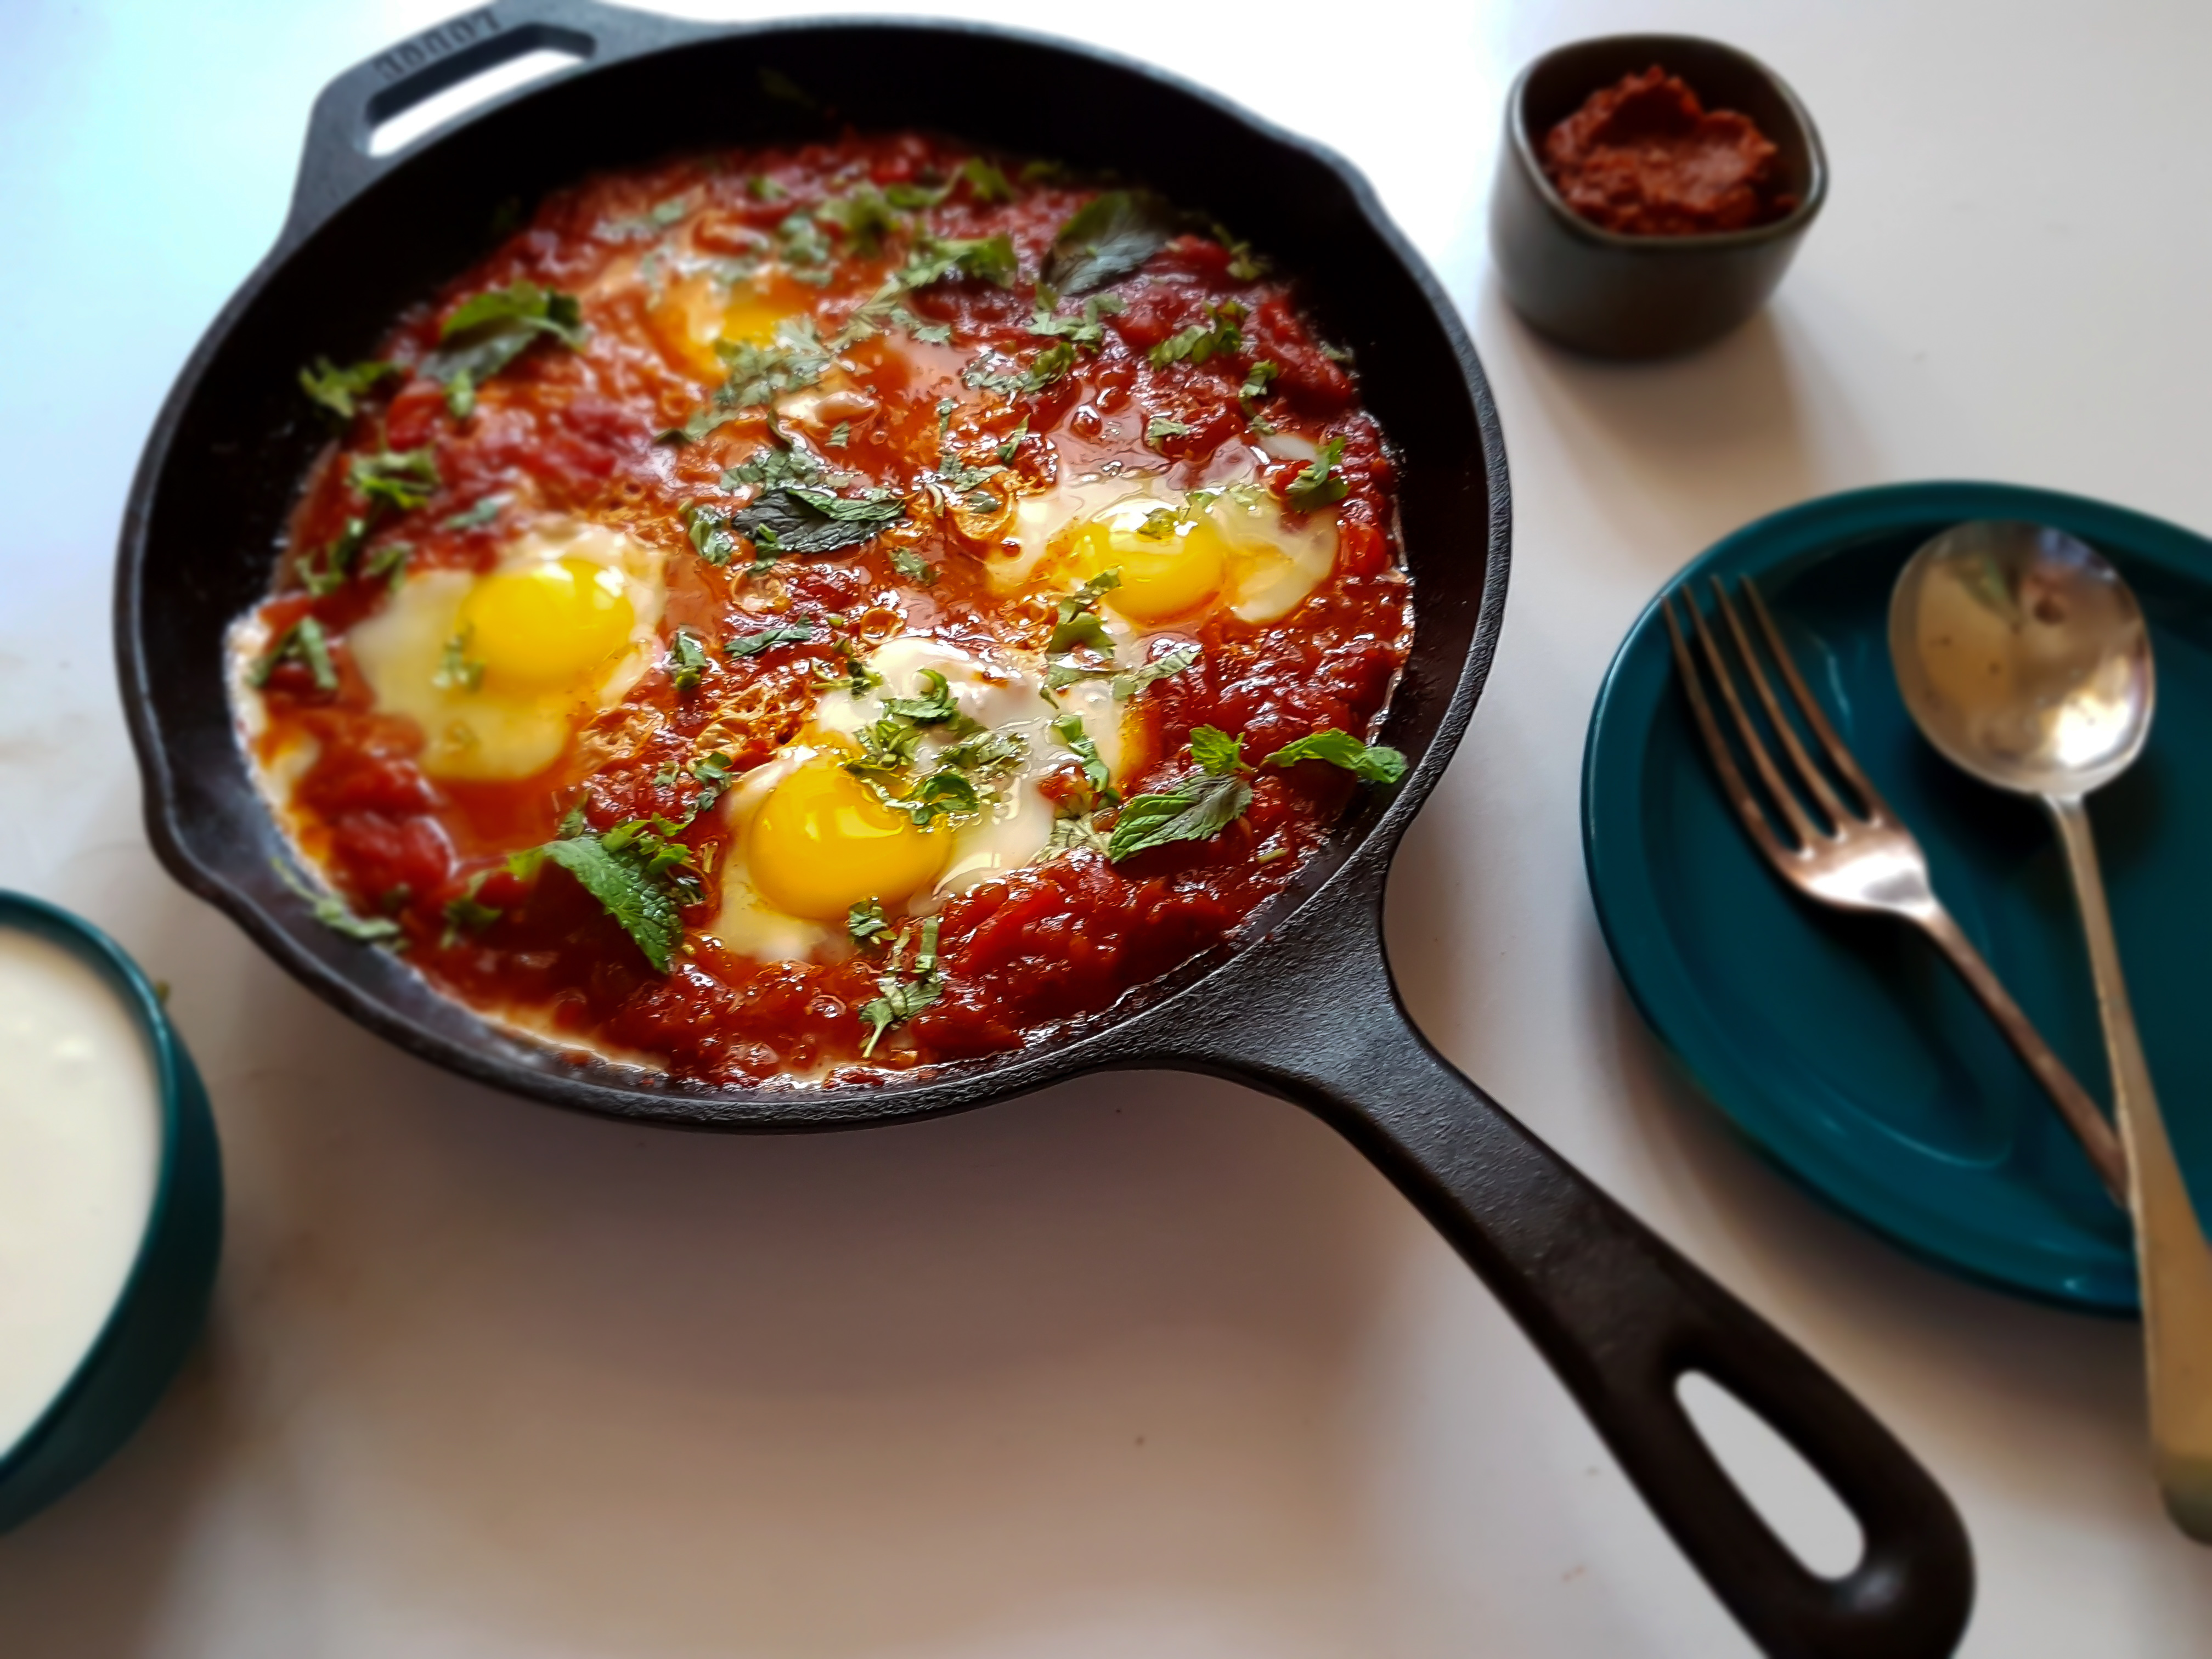 Shakshuka is saucy, spicy with poached eggs makes a perfect breakfast